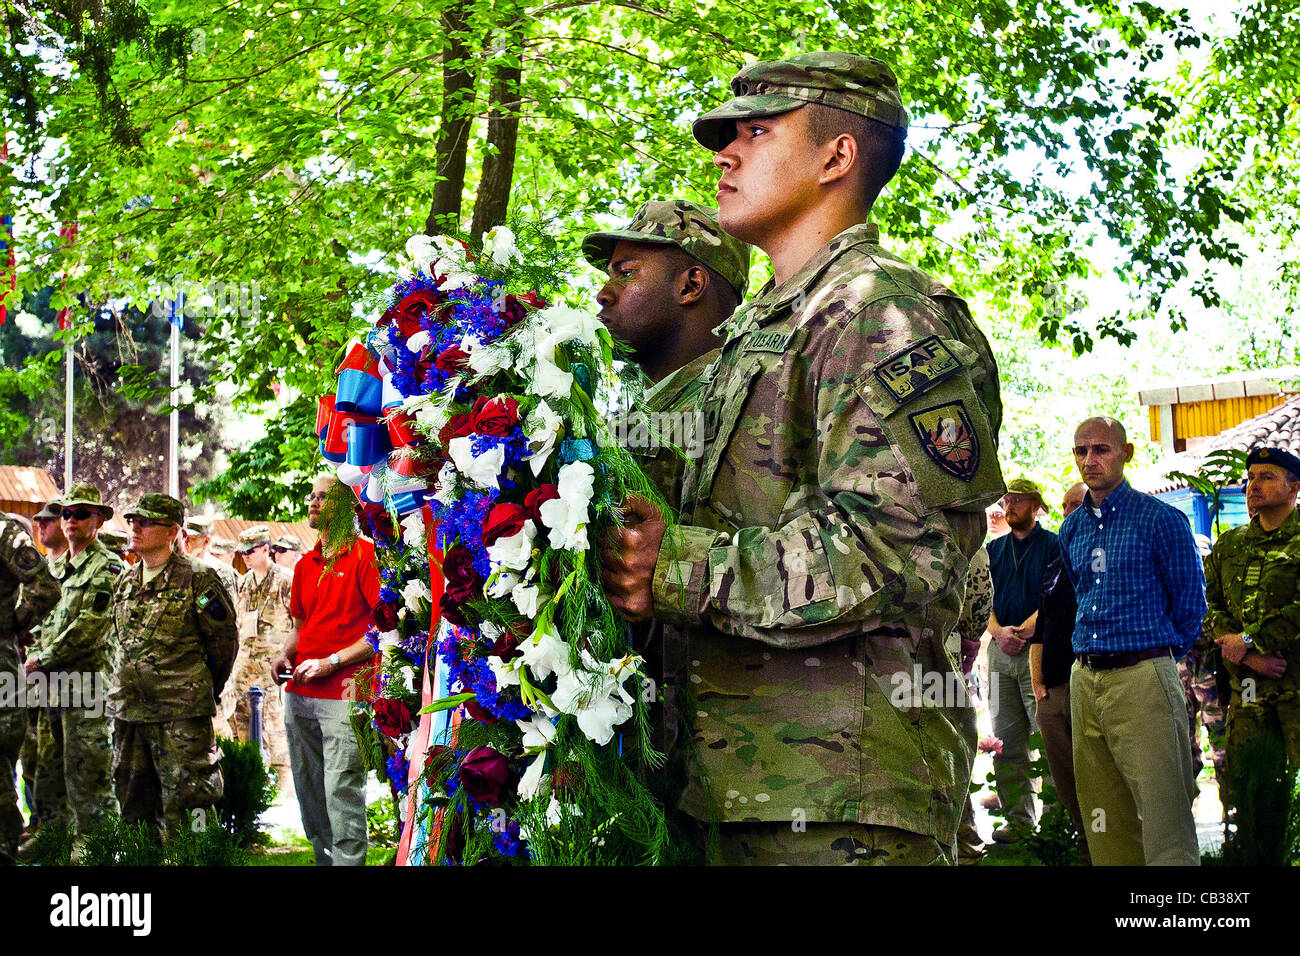 US service members prepare to present a wreath during a Memorial Day ceremony at the International Security Assistance Force headquarters May 28, 2012 in Kabul, Afghanistan. Stock Photo